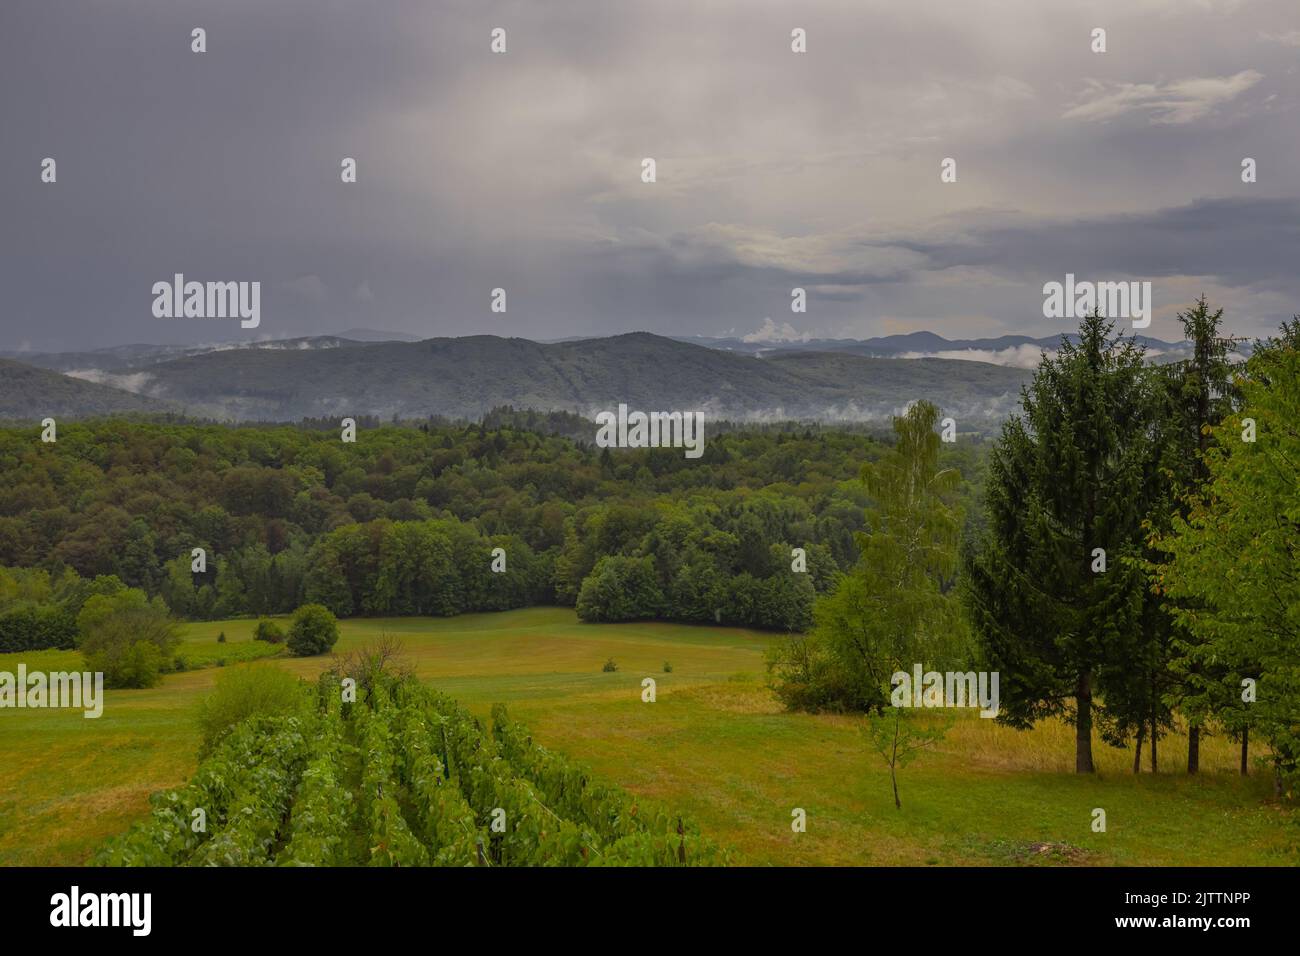 Photo of a wineyard in dolenjska region of slovenia with dense and thick clouds coming over the sky. Rain on the right side visible. Stock Photo